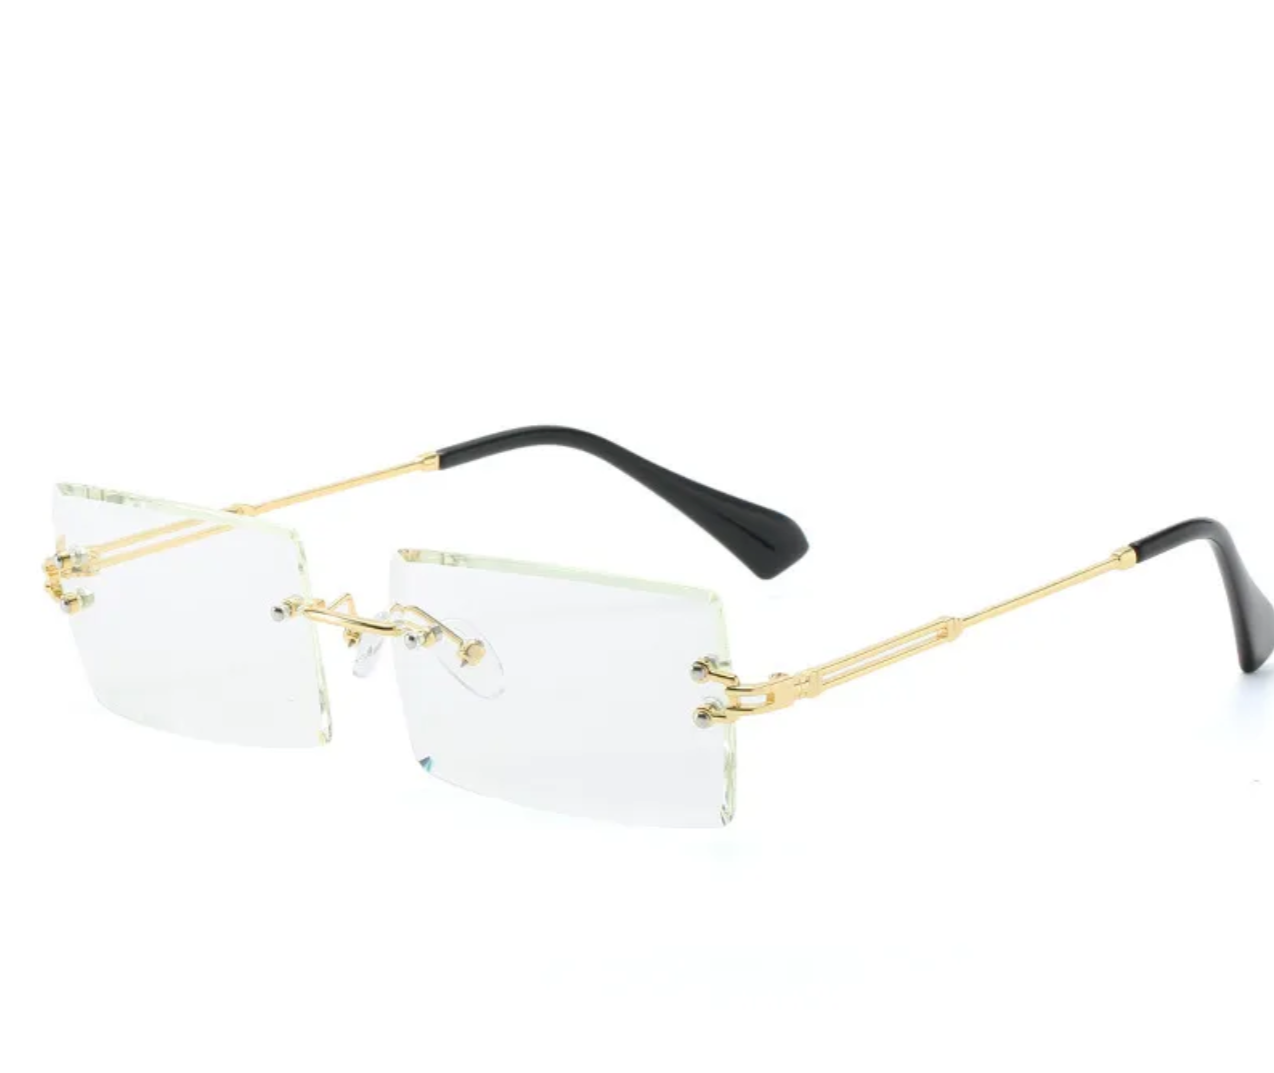 Frames for a Stylish Perspective: Aesthetic Glasses Collection